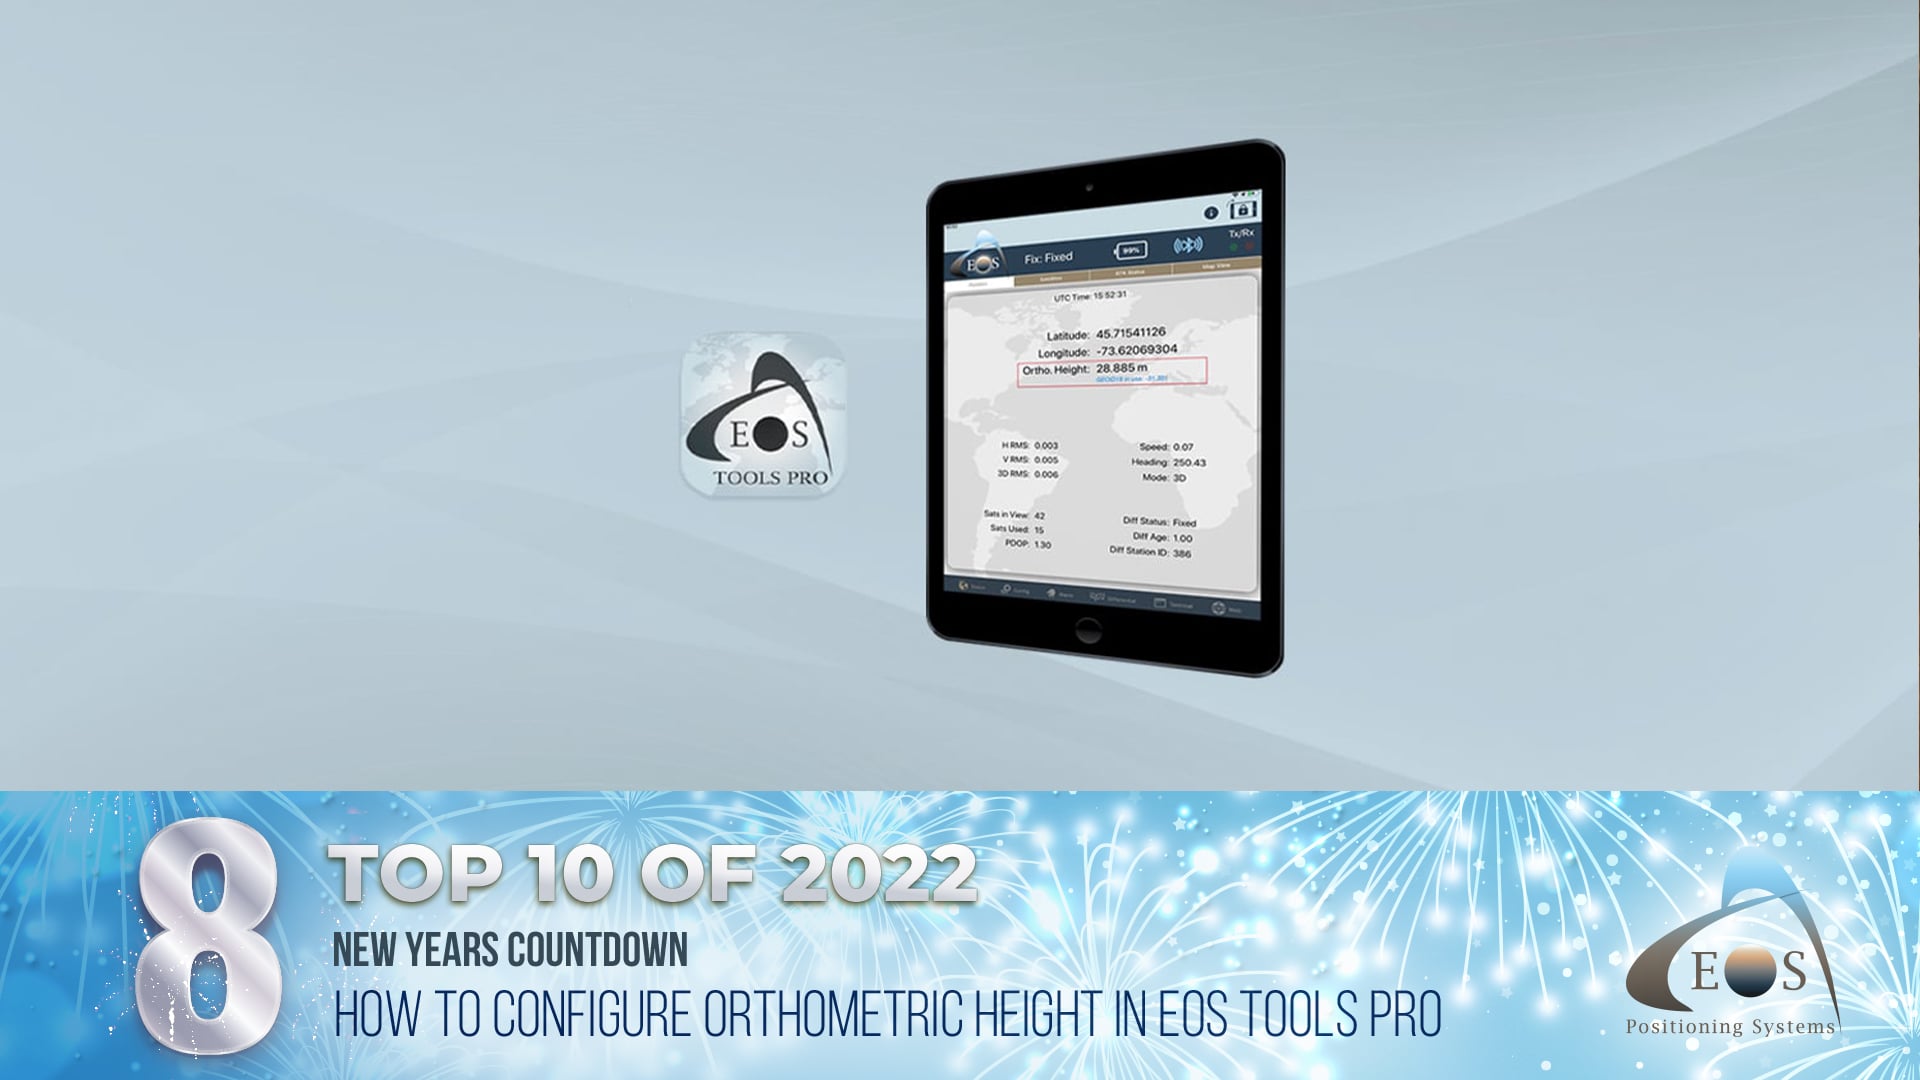 8 How to Configure Orthometric Height in Eos Tools Pro - Top 10 of 2022